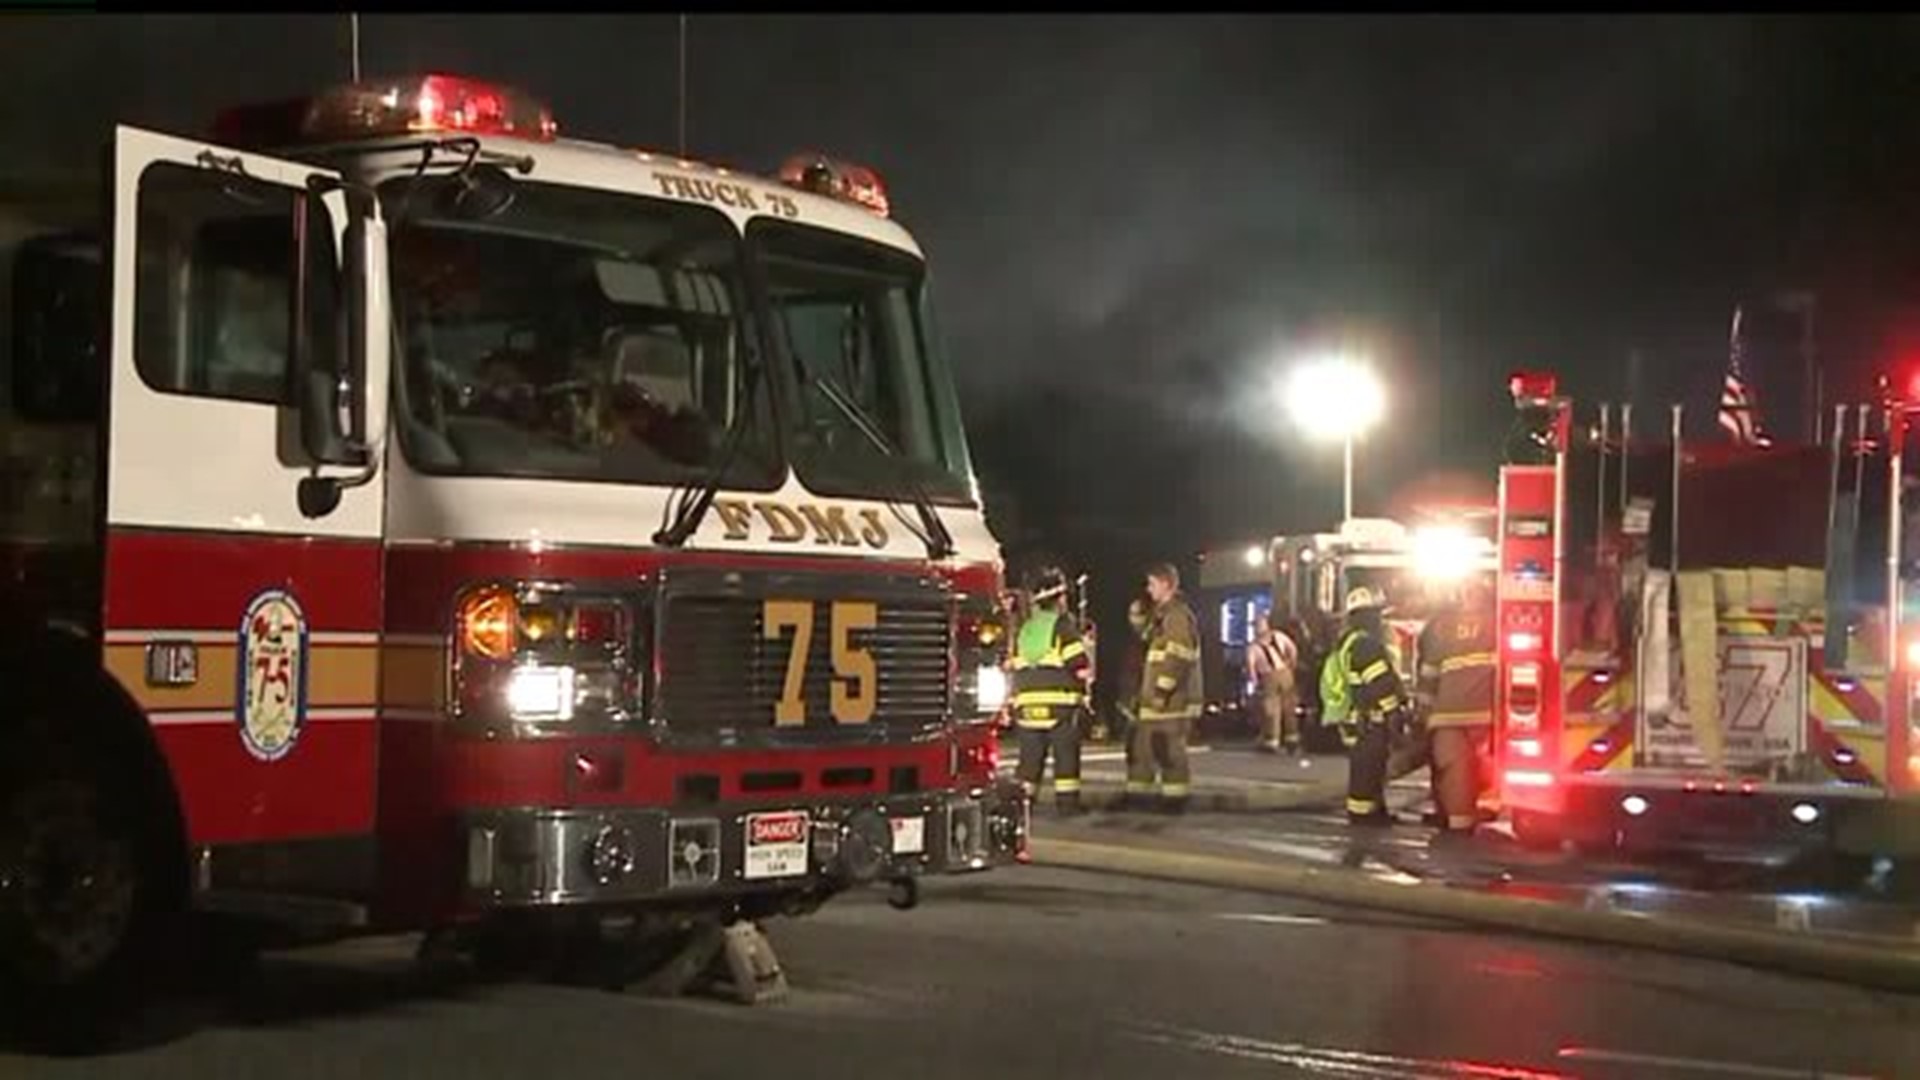 Fire breaks out at Burger King in Lancaster County